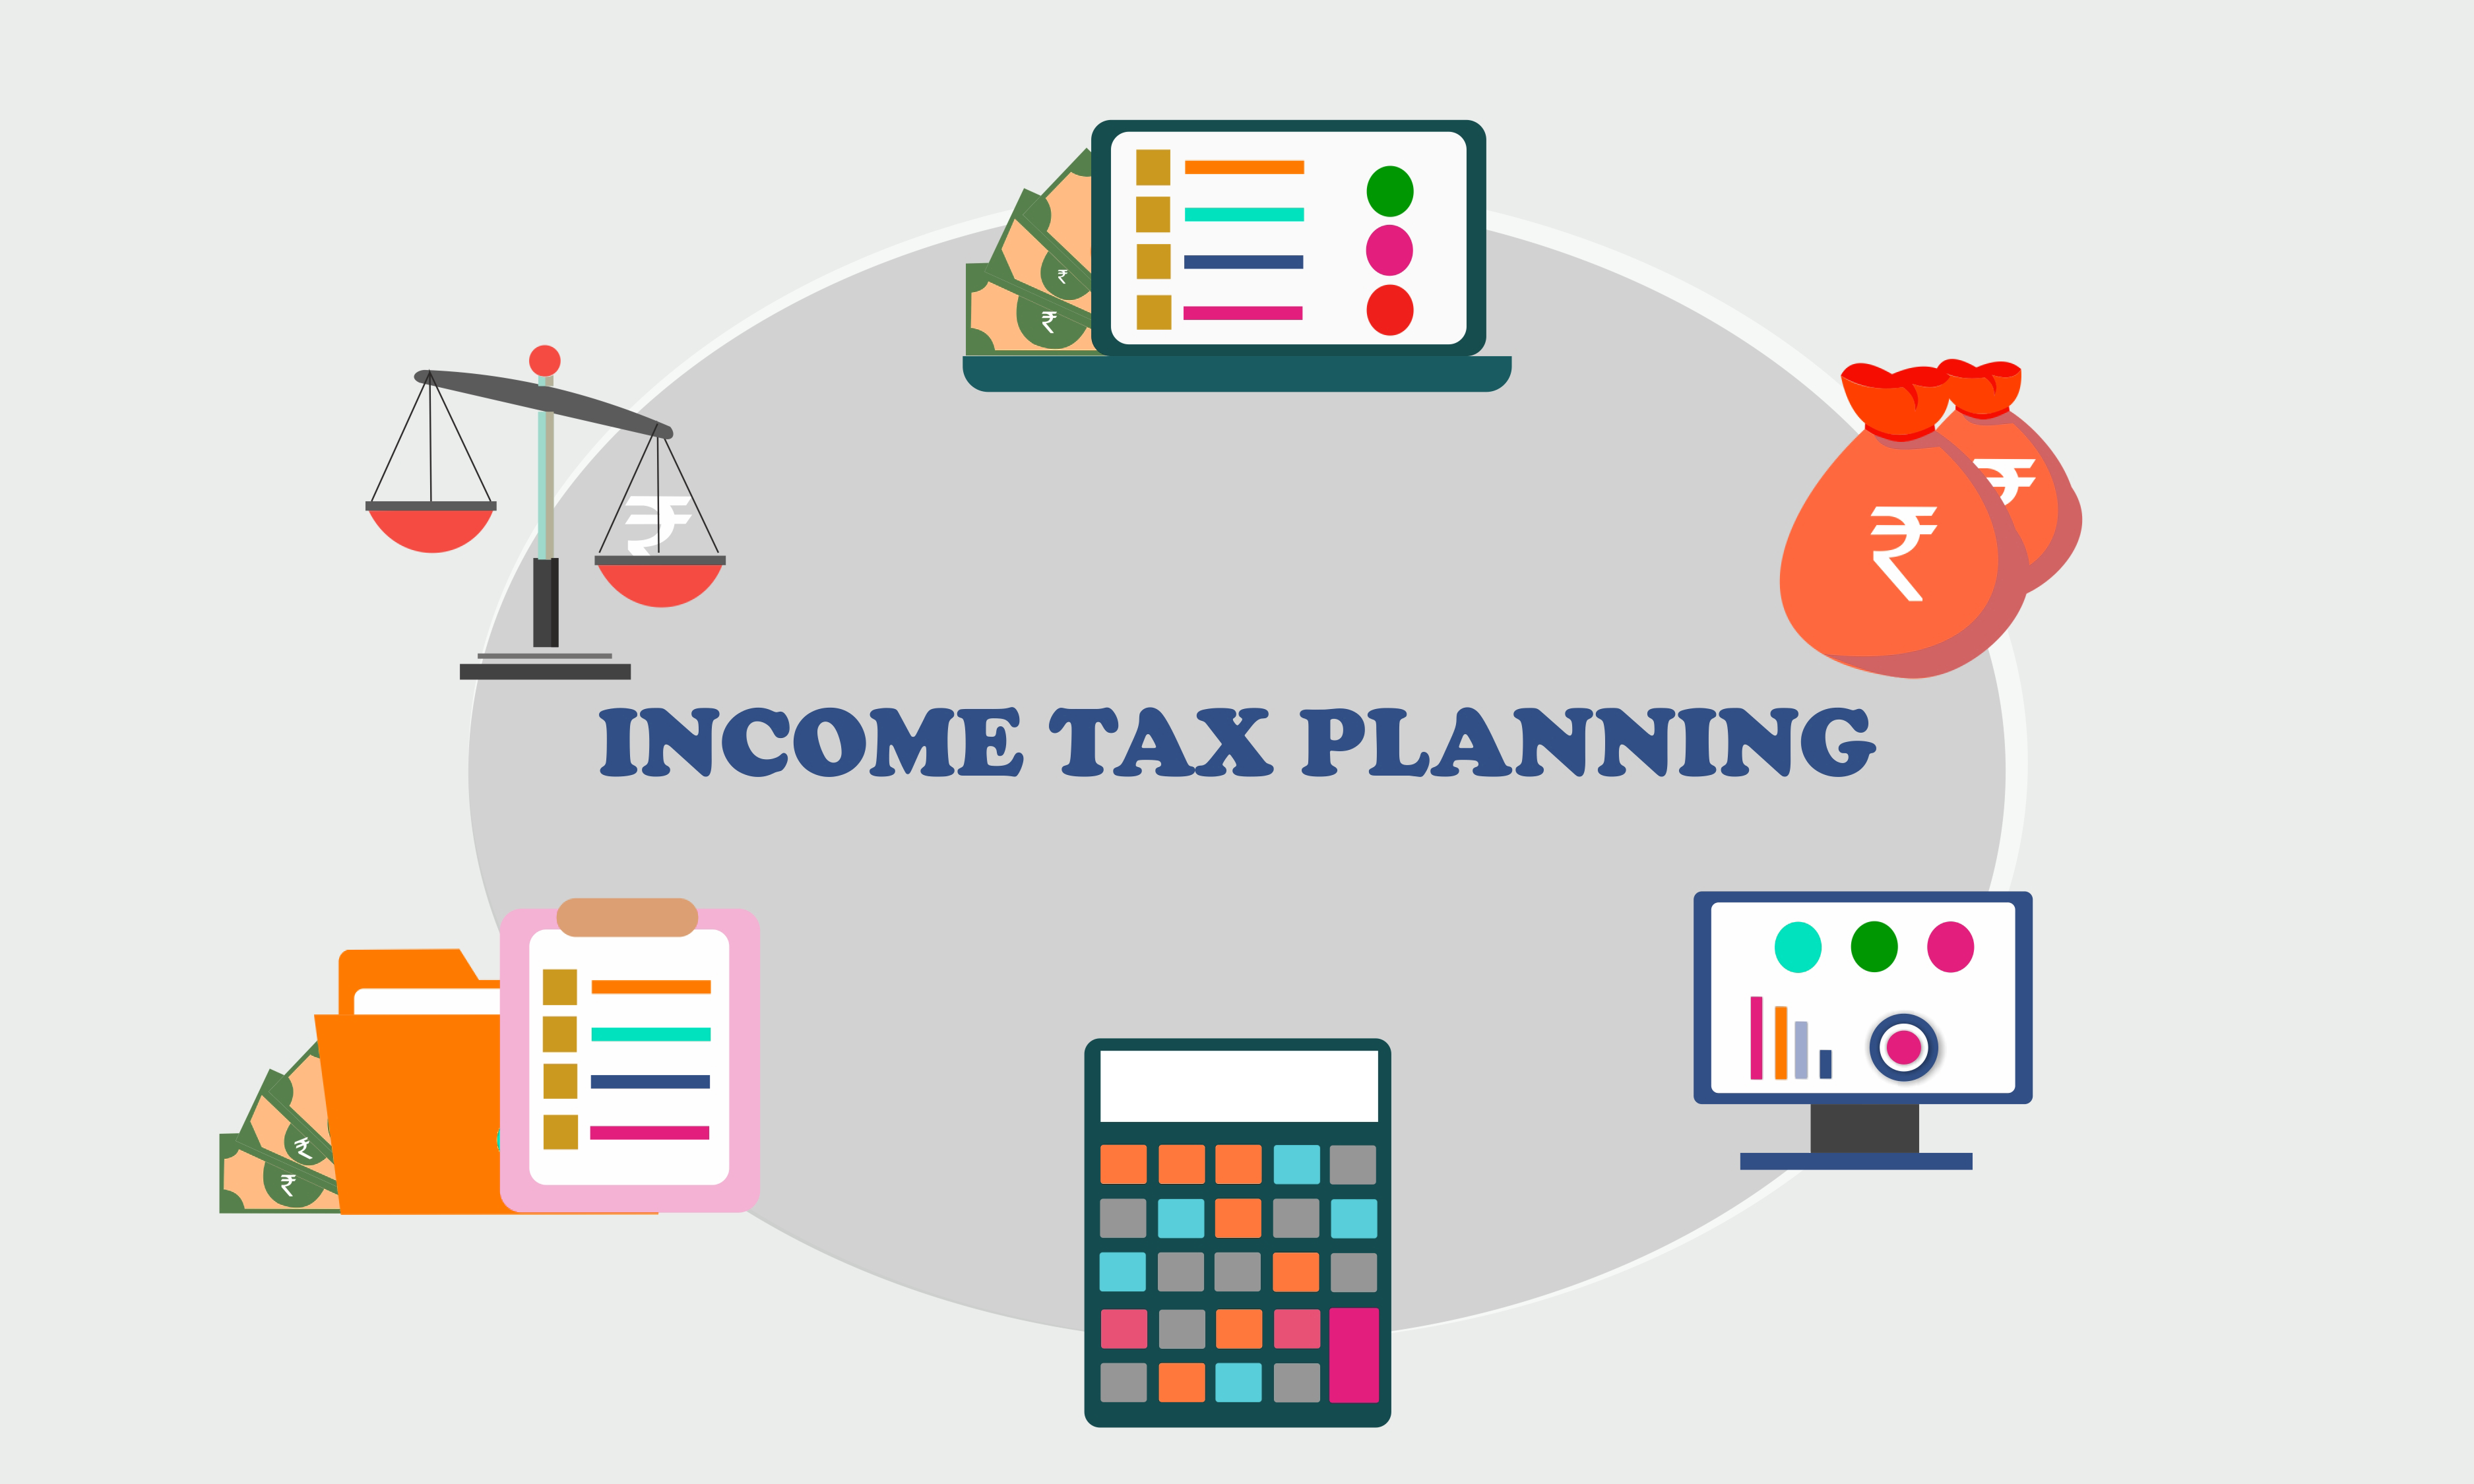 The images depict how to plan for the Income Tax to to avoid higher TDS. 